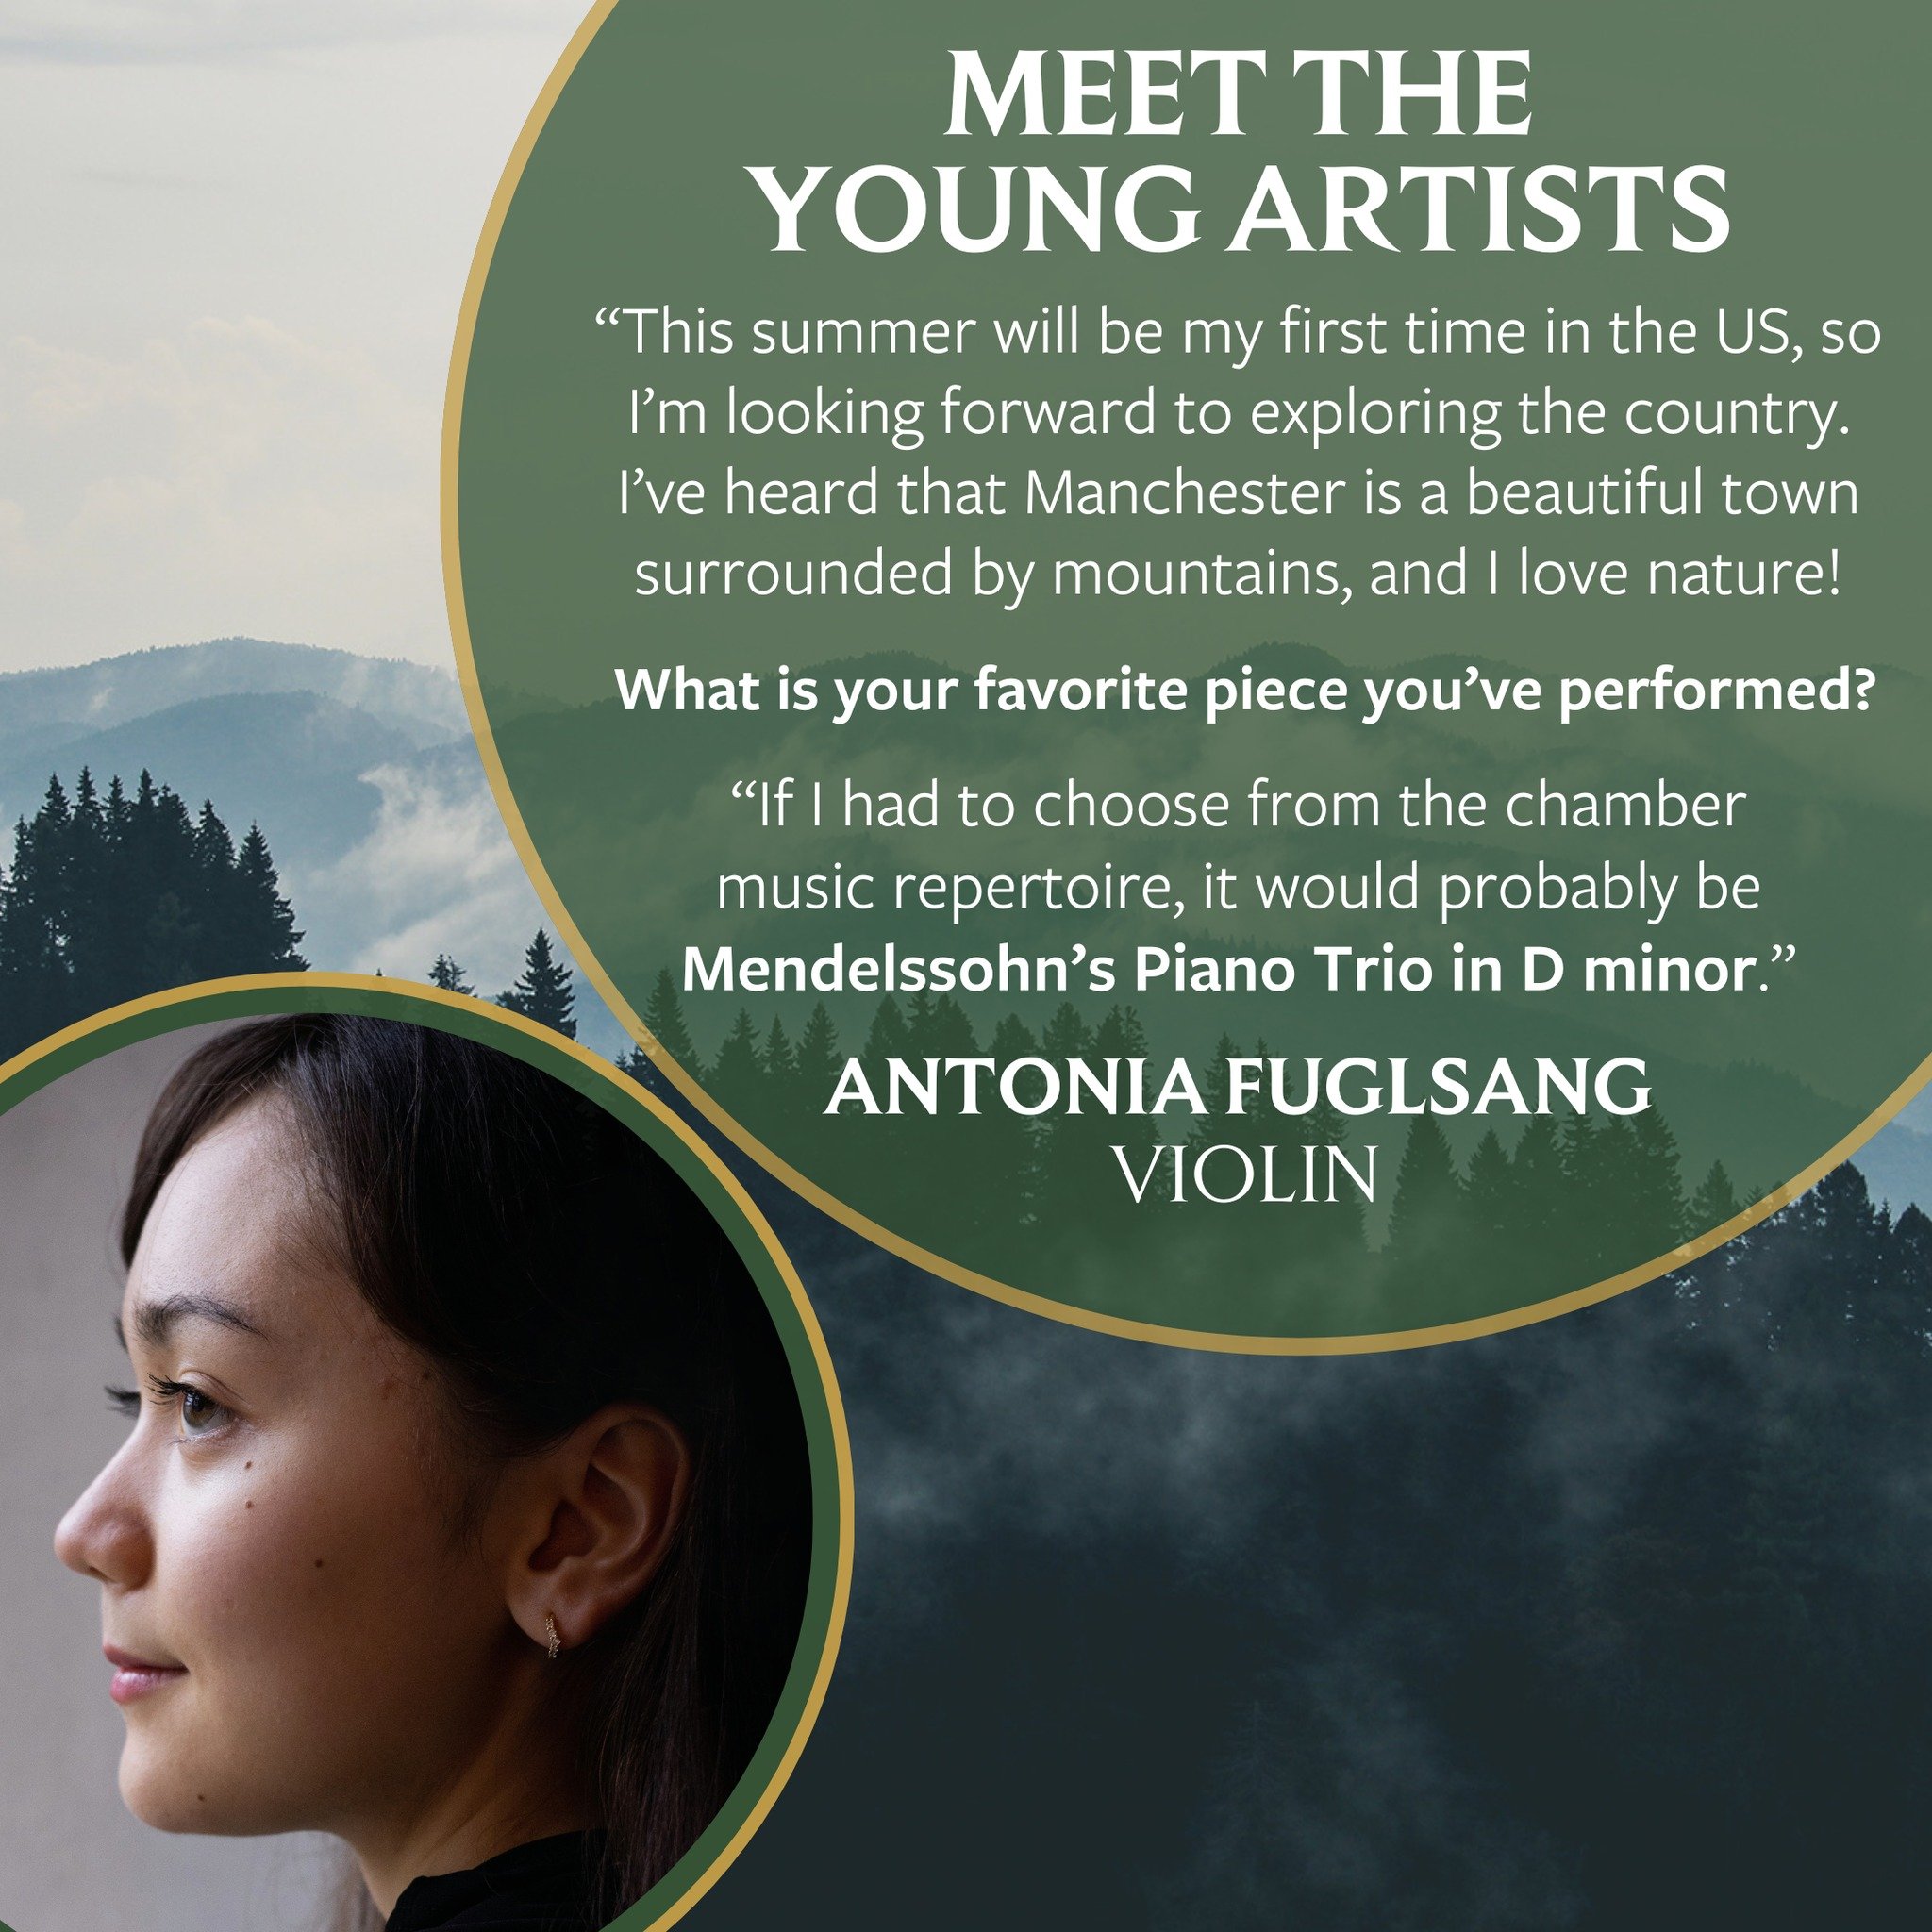 Hailing from Denmark, we look forward to welcoming Antonia Fuglsang to Manchester (and the US!) this summer. 🇩🇰☀️

Antonia won first prize in both the 2019 Southern Denmark Talent Competition and the 2022 Jacob Gade Violin Competition. She's curren